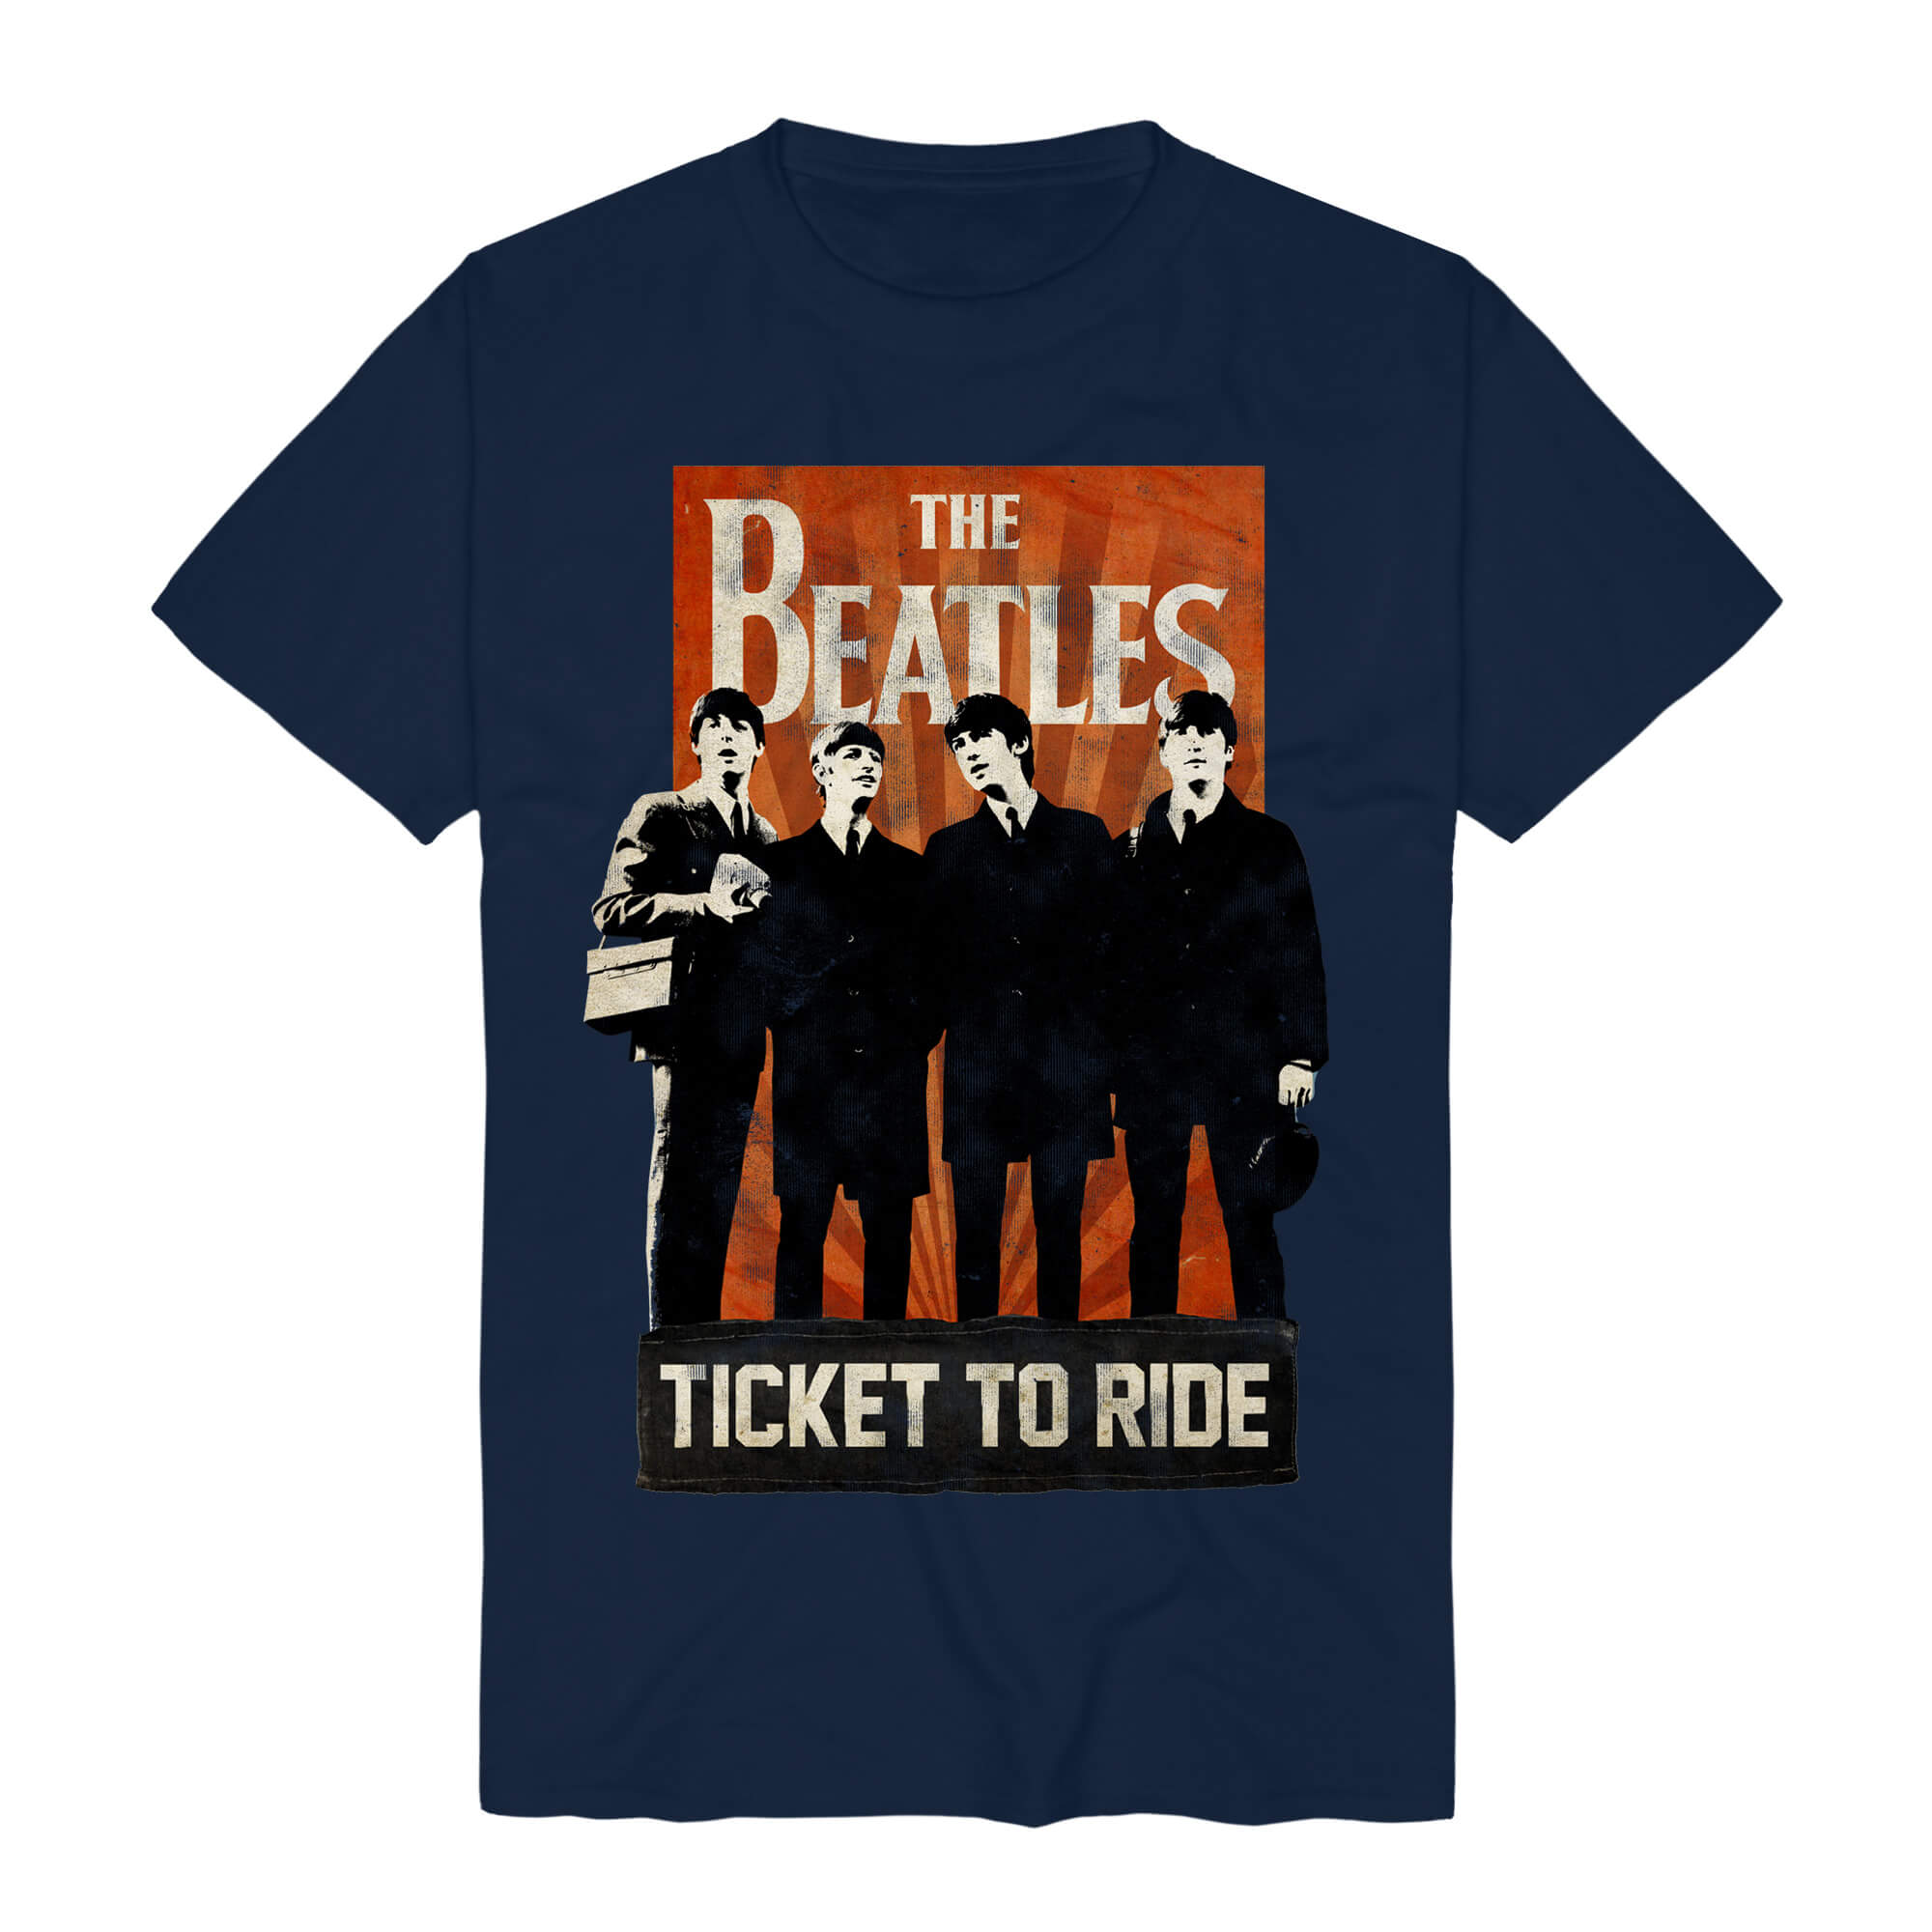 The Beatles - Ticket To Ride (Small)